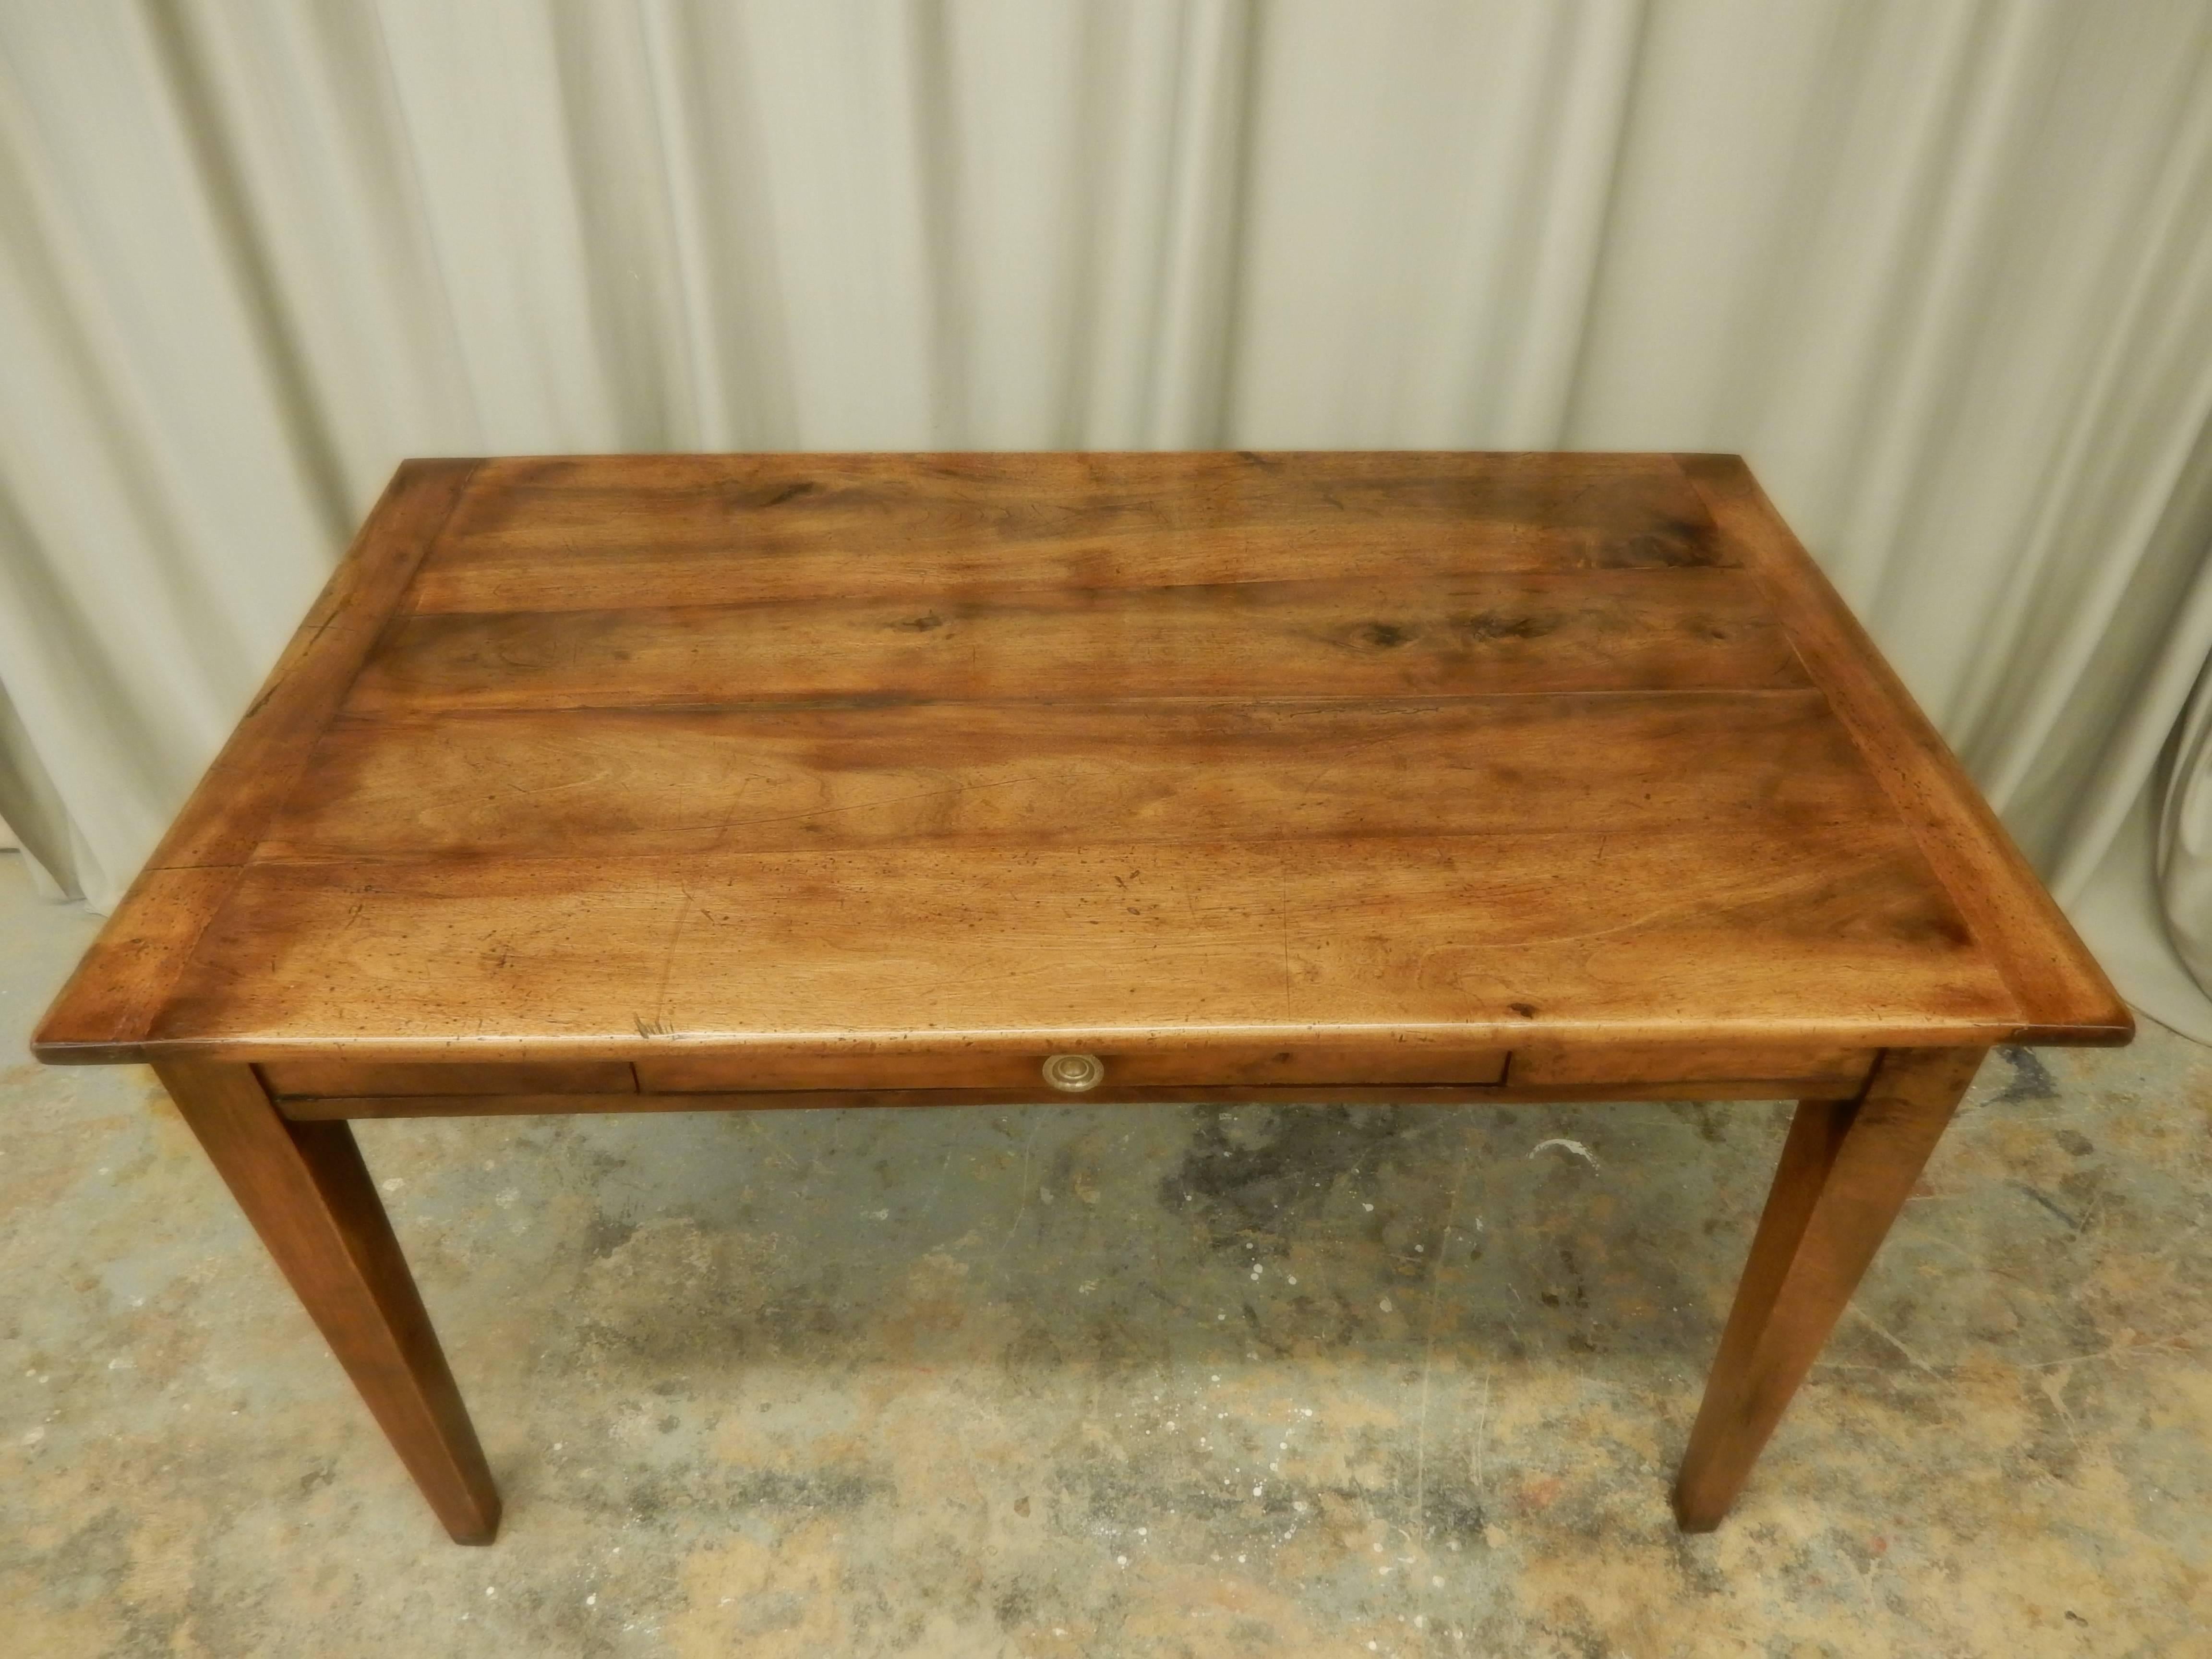 French Provincial walnut writing desk or small farm table with lovely warm patina and one draw. It has been carefully restored. Distance between bottom of apron and floor is 25